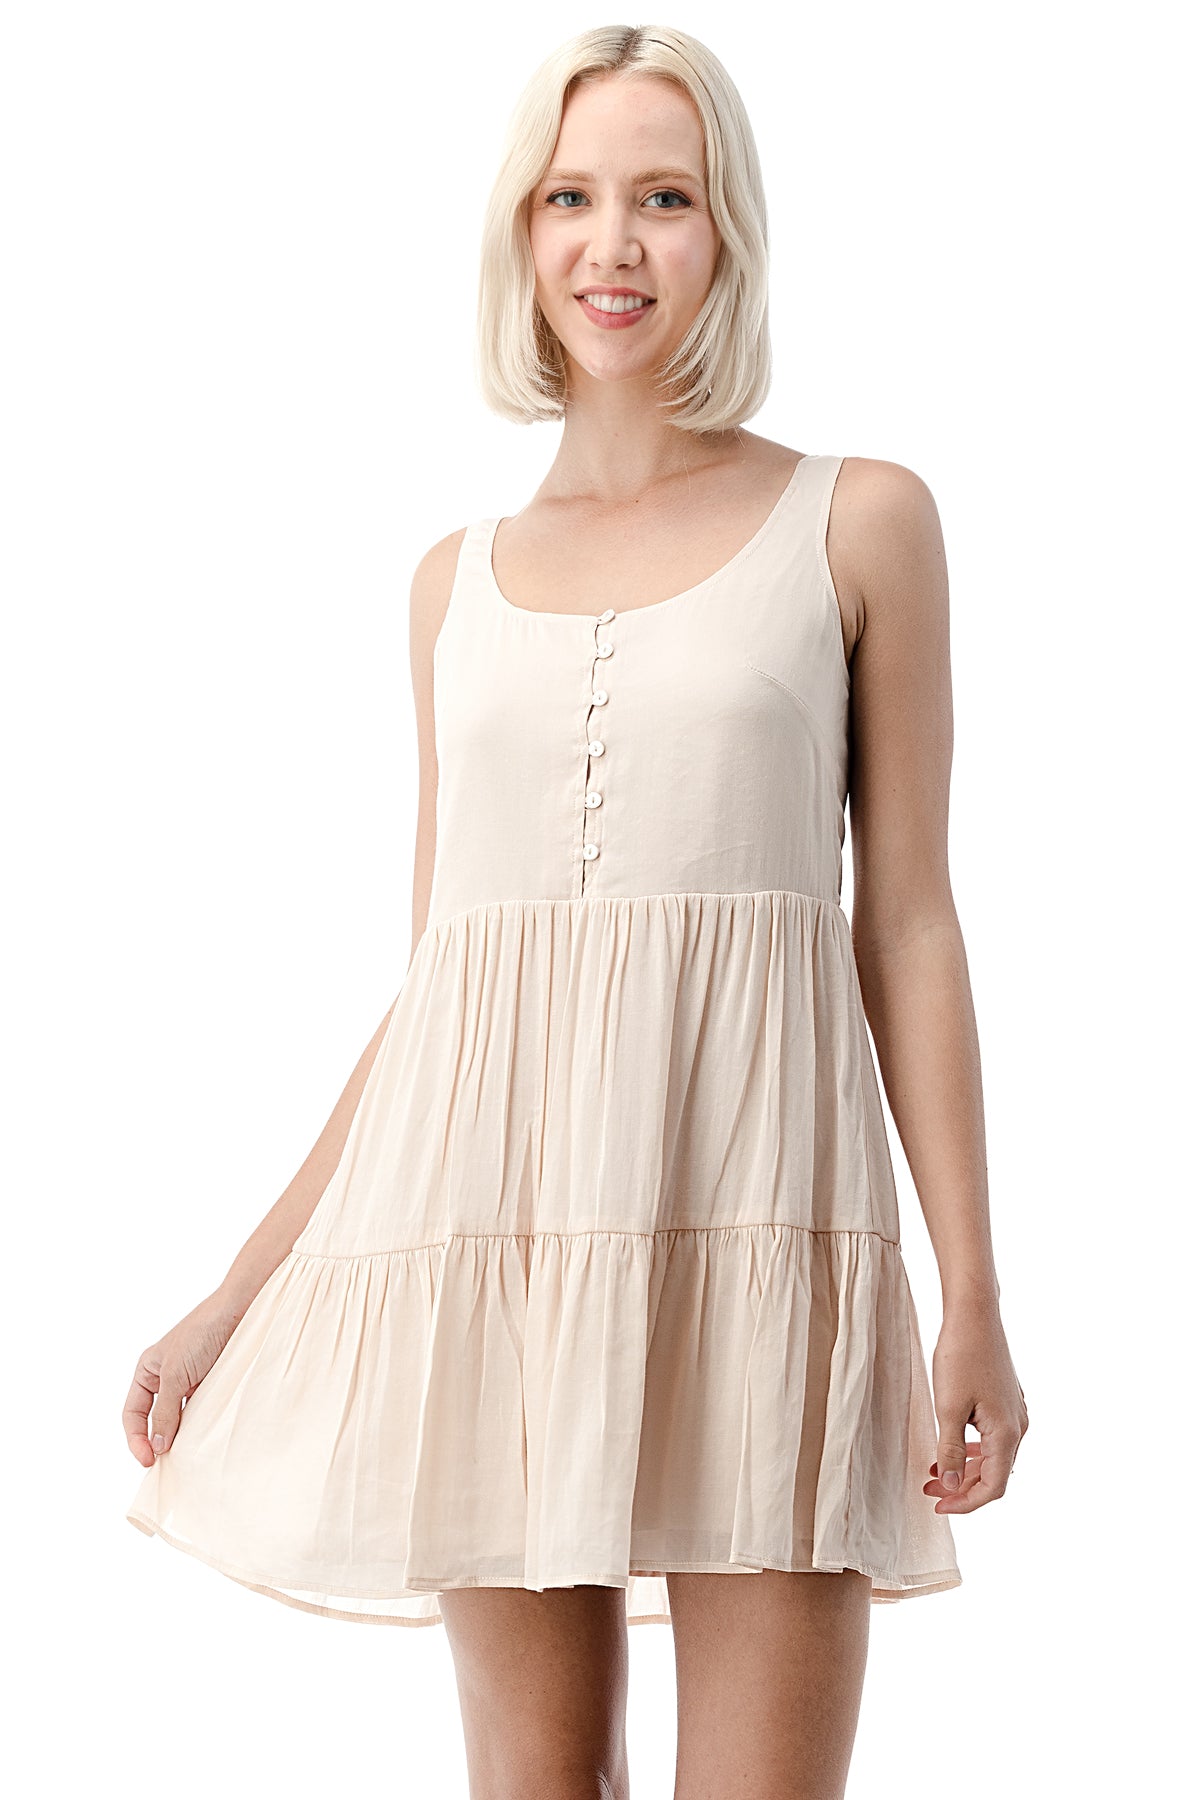 EDGY Land Girl's and Women's Buttoned Sleeveless Mini-length A-Line Party Dress